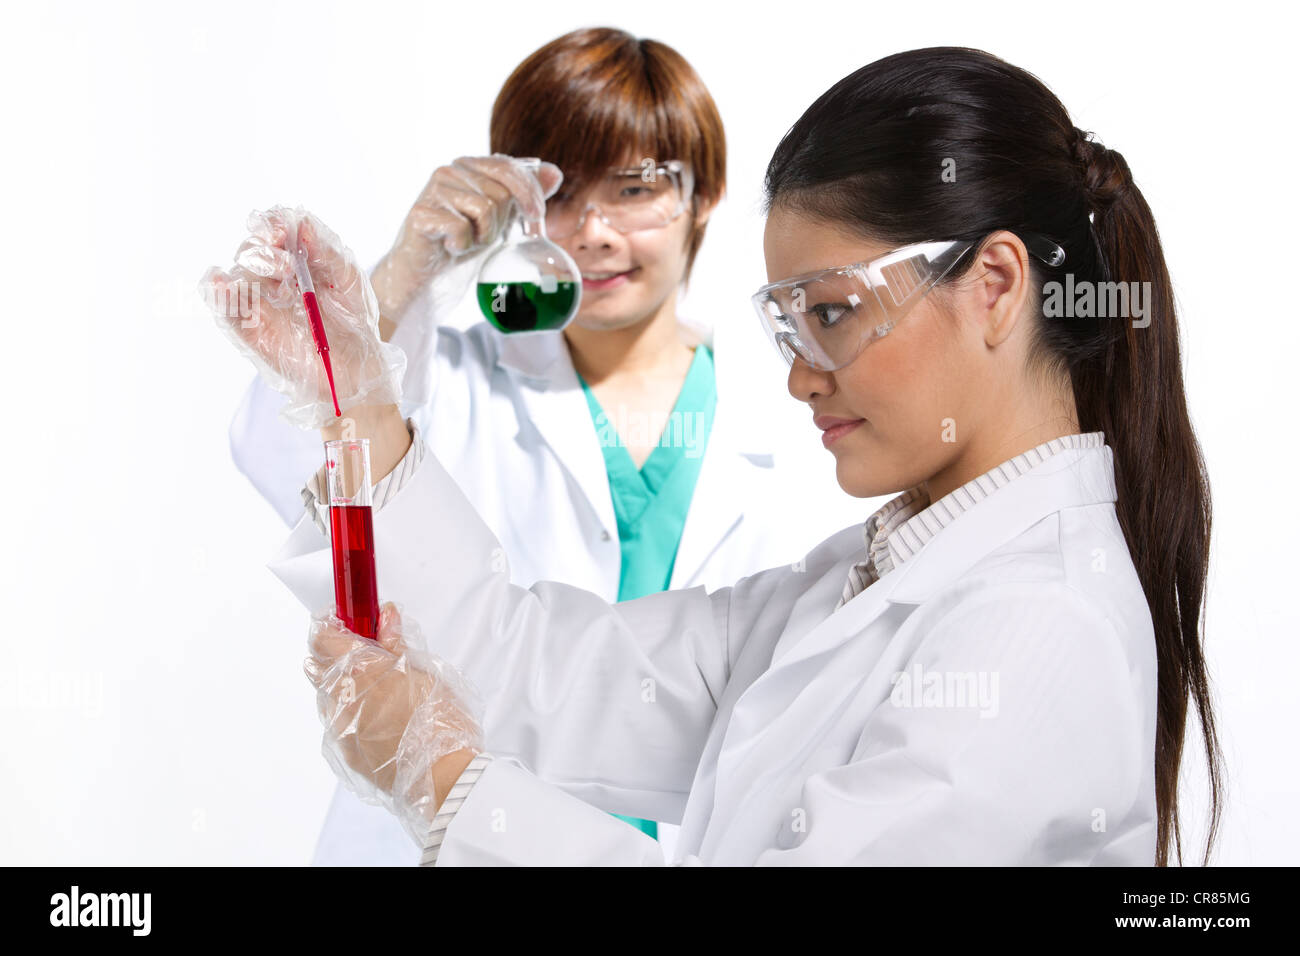 Two scientists analyzing solution. Stock Photo